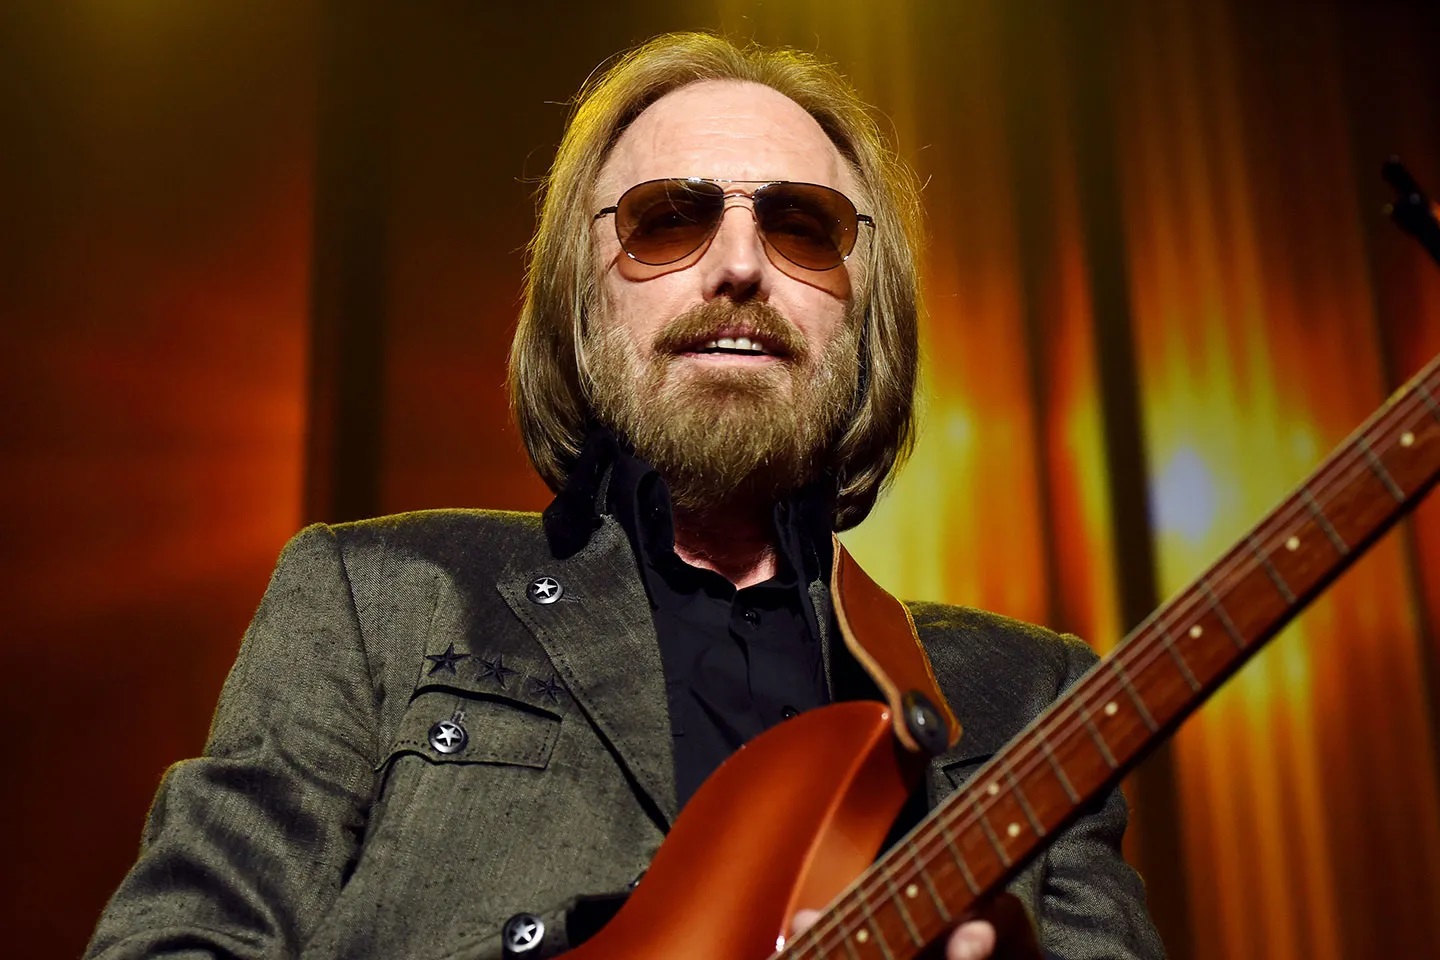 tom-petty-auction-items-safely-returned-to-family-after-claims-of-theft